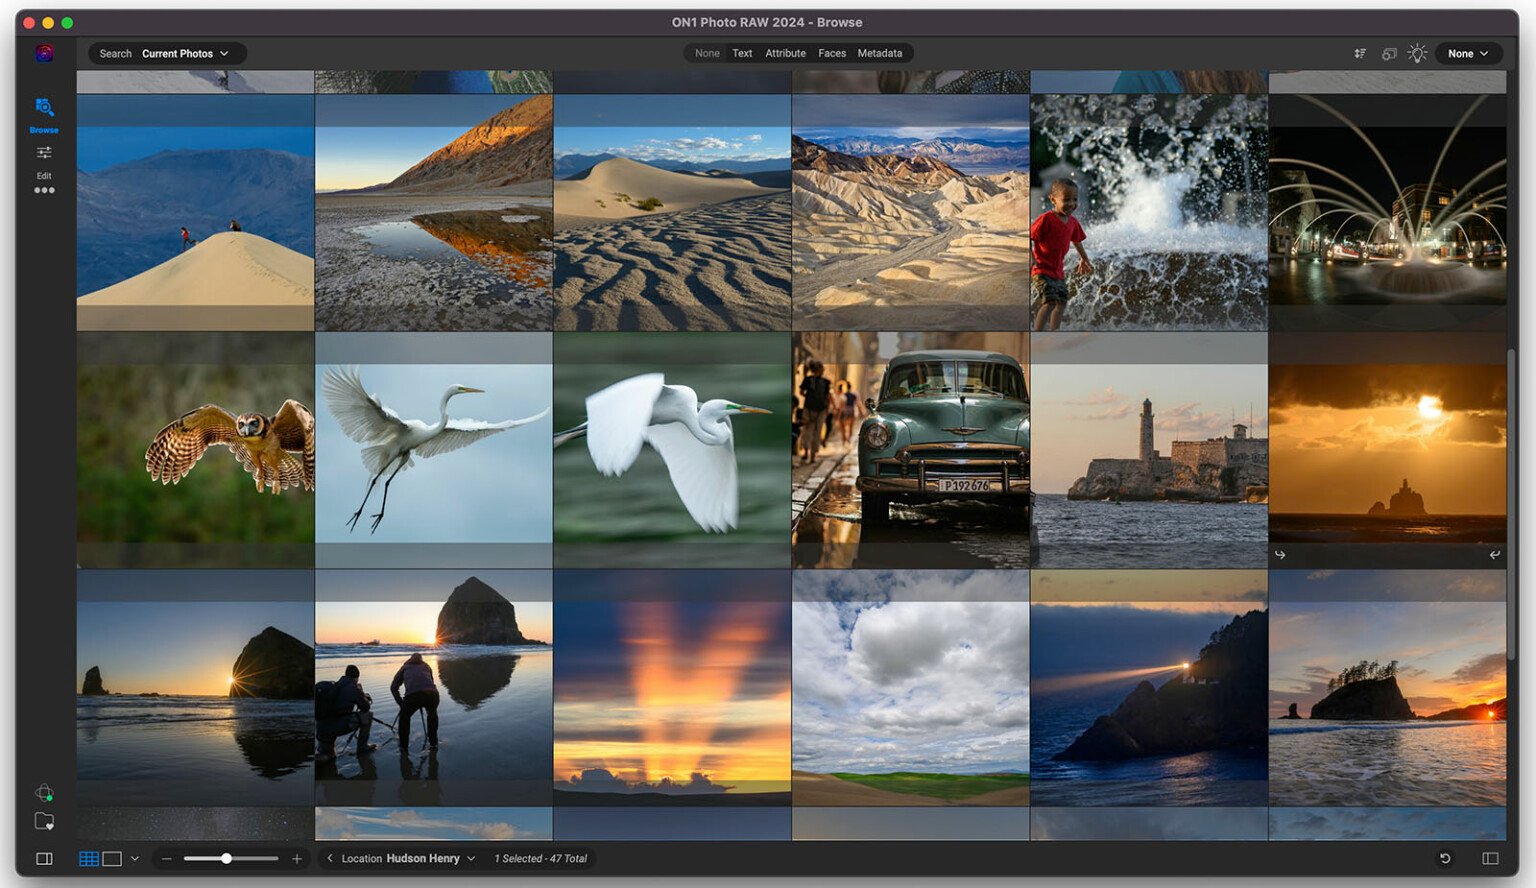 ON1 Photo RAW 2024.5 v18.5.0.15562 ​​​​​​​(x64) Multilingual On1-photo-raw-2024-browse-1536x888